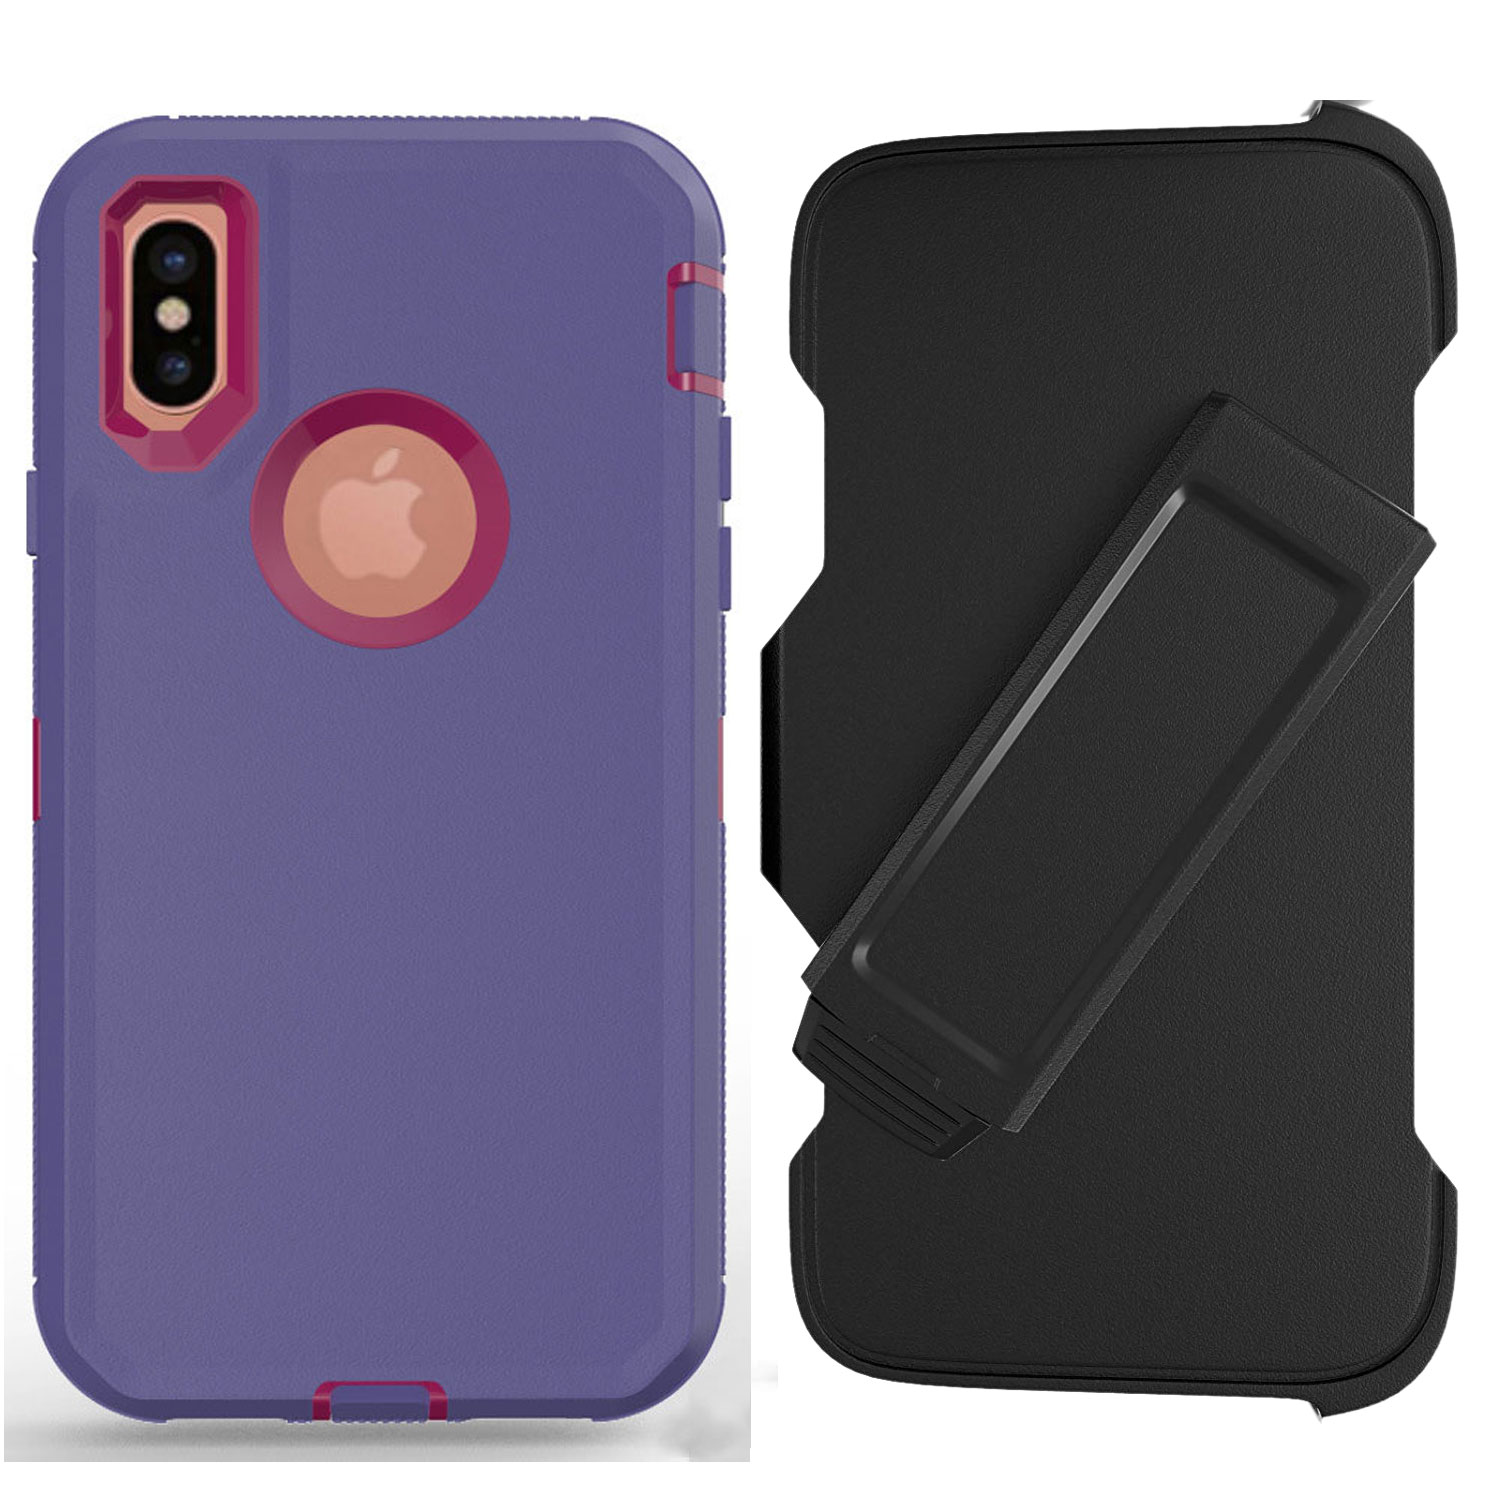 iPHONE Xs Max Armor Robot Case with Clip (Purple Hot Pink)